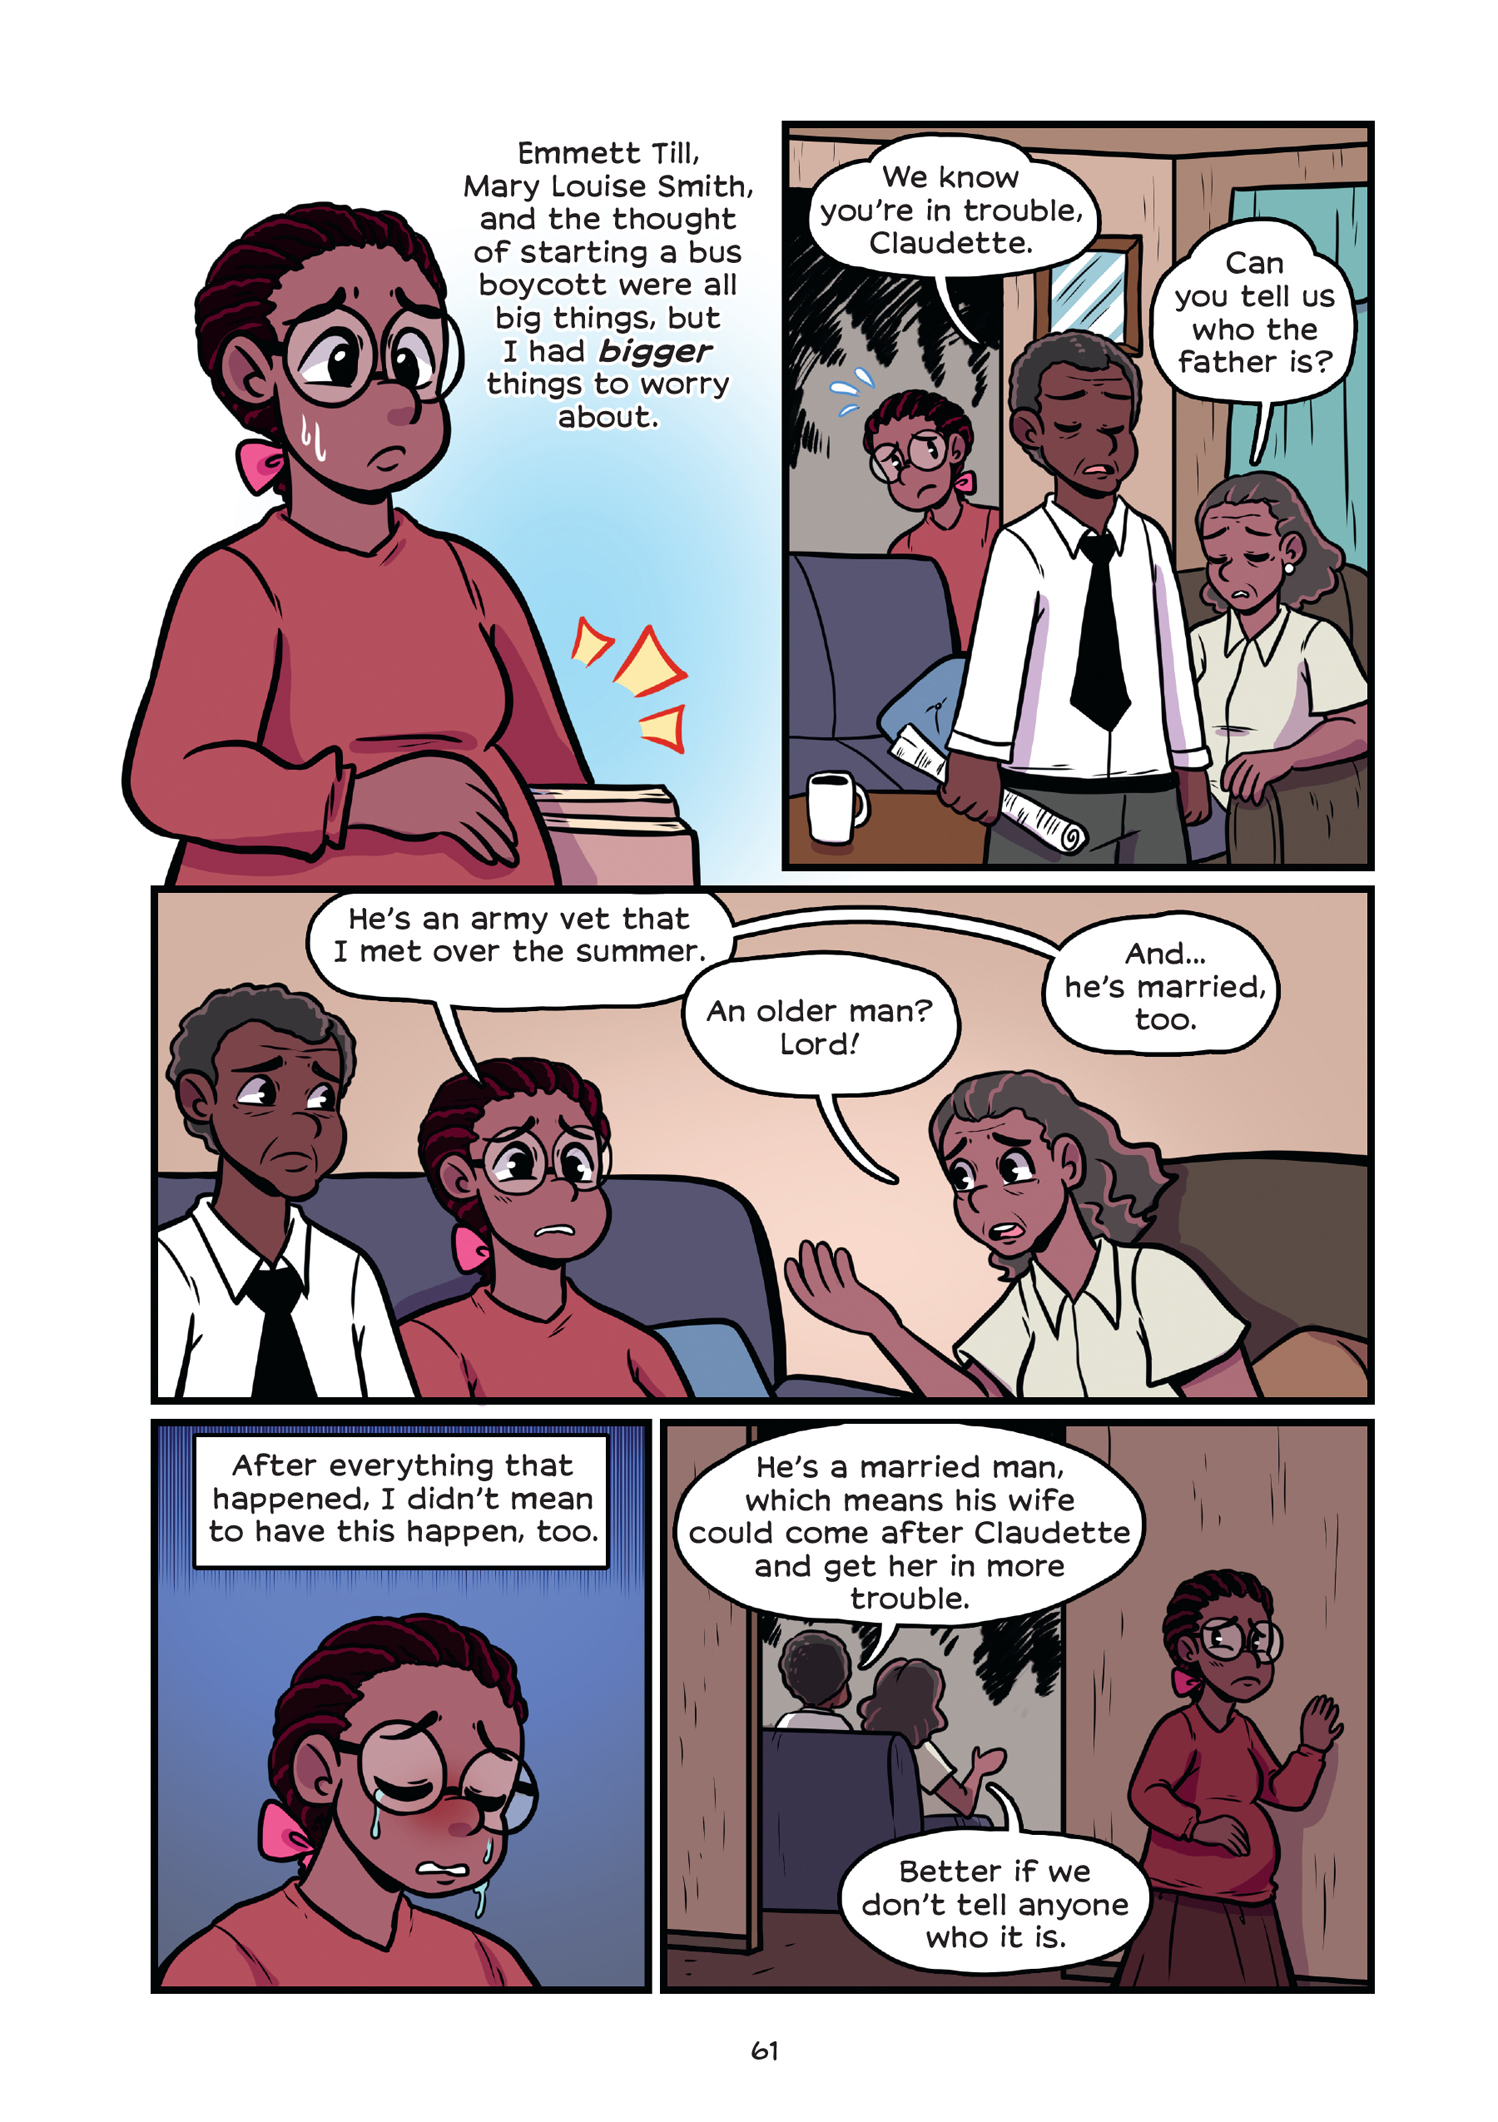 Read online History Comics comic -  Issue # Rosa Parks & Claudette Colvin - Civil Rights Heroes - 66